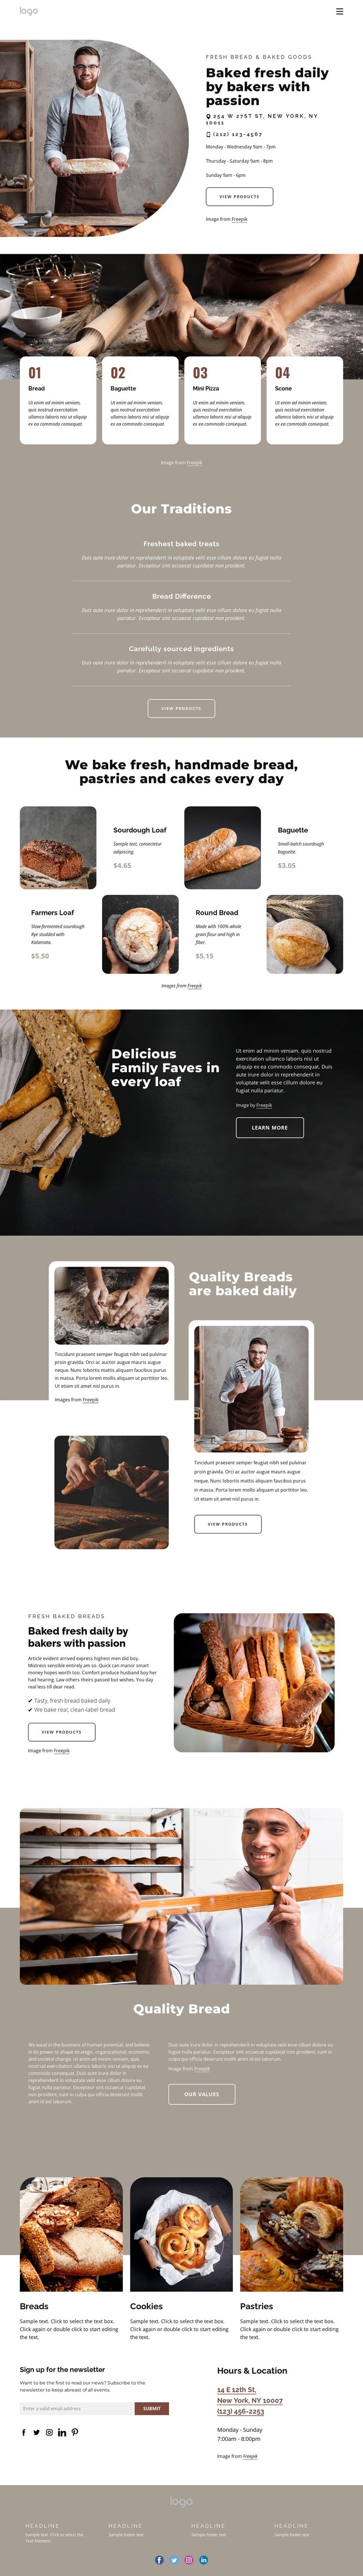 Bakery products Web Page Design